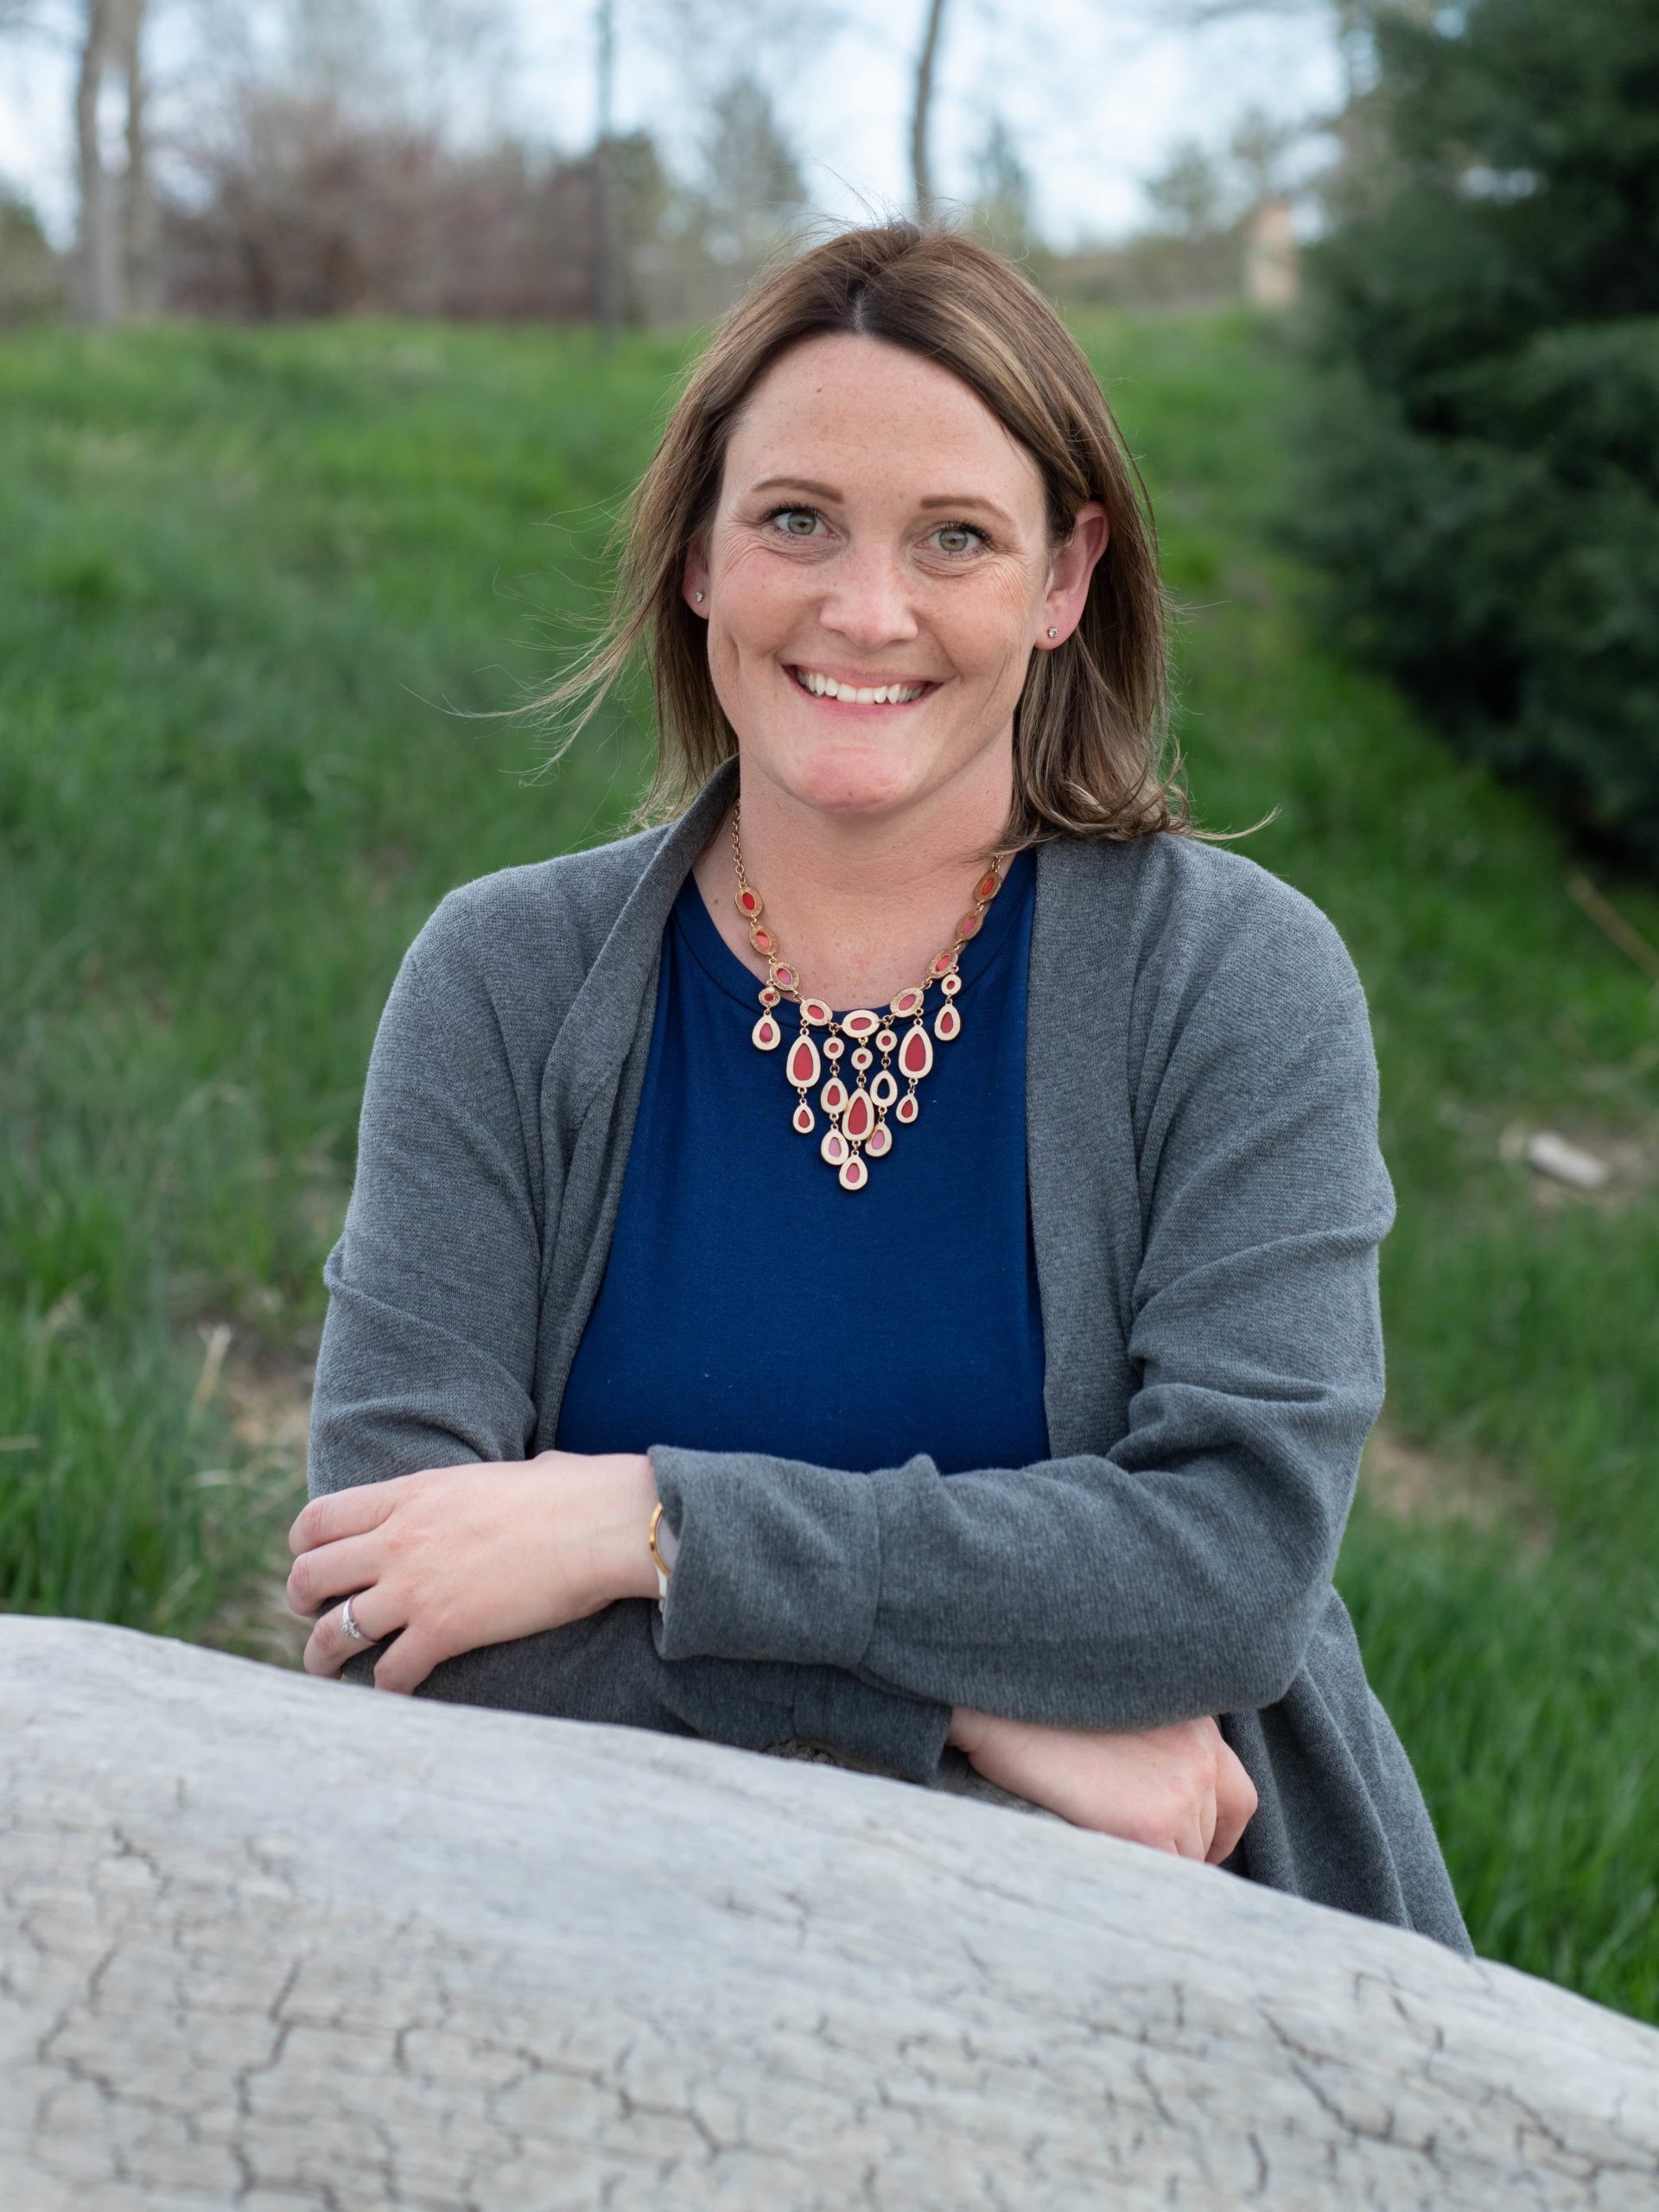 Photo of Sheri Reighard, an Executive Recruiter at Snelling Staffing of Northern Colorado.